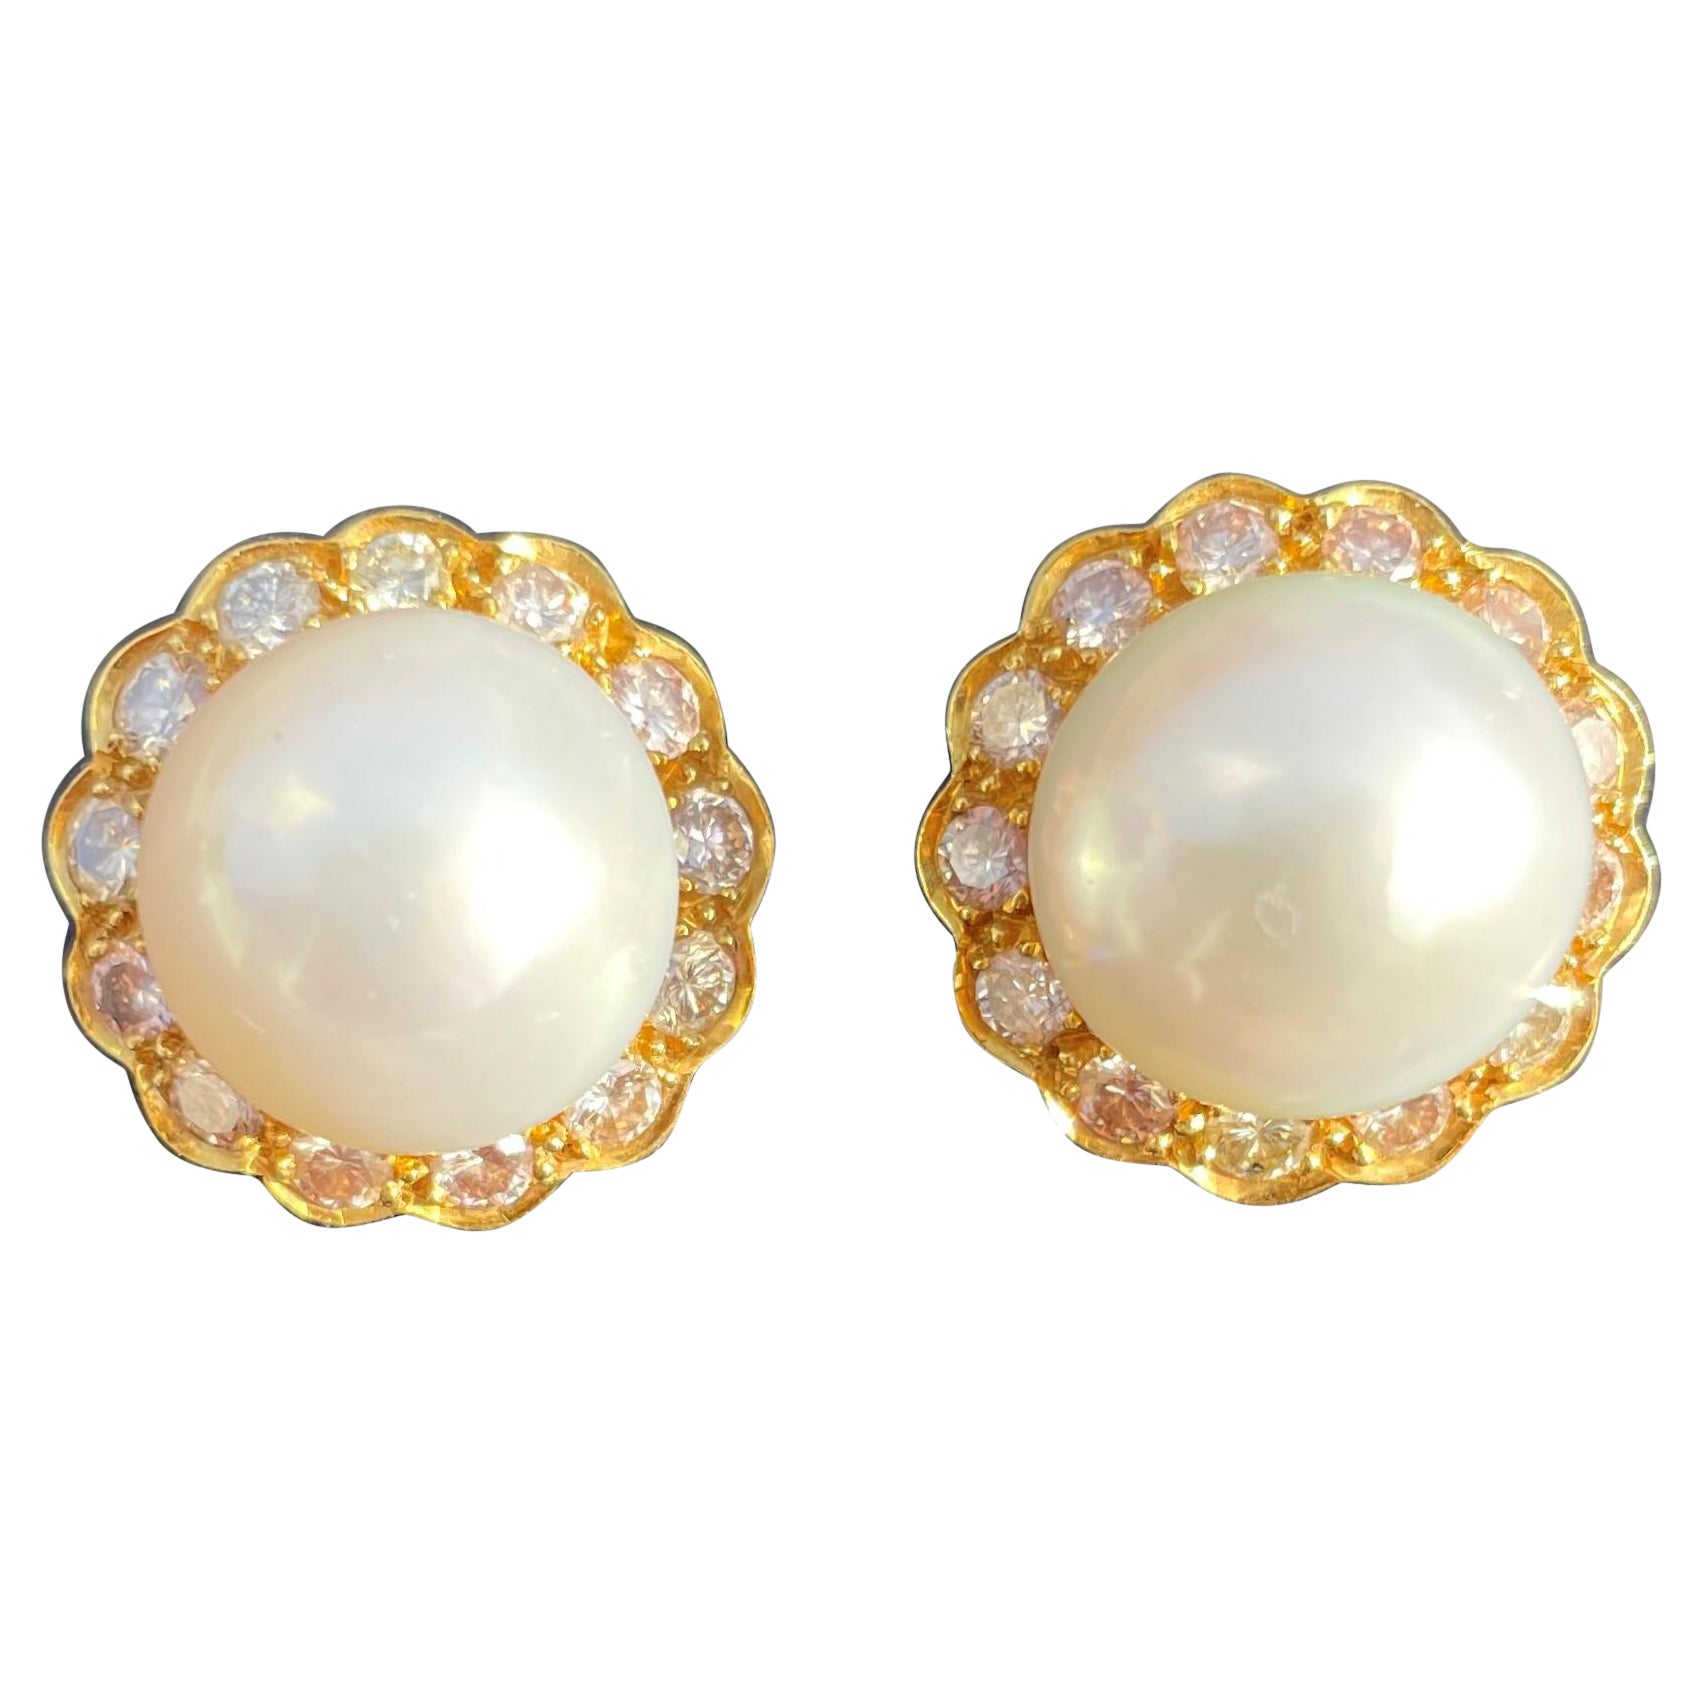 Vintage 14k Golden Clip on Earrings with Diamonds and Pearl